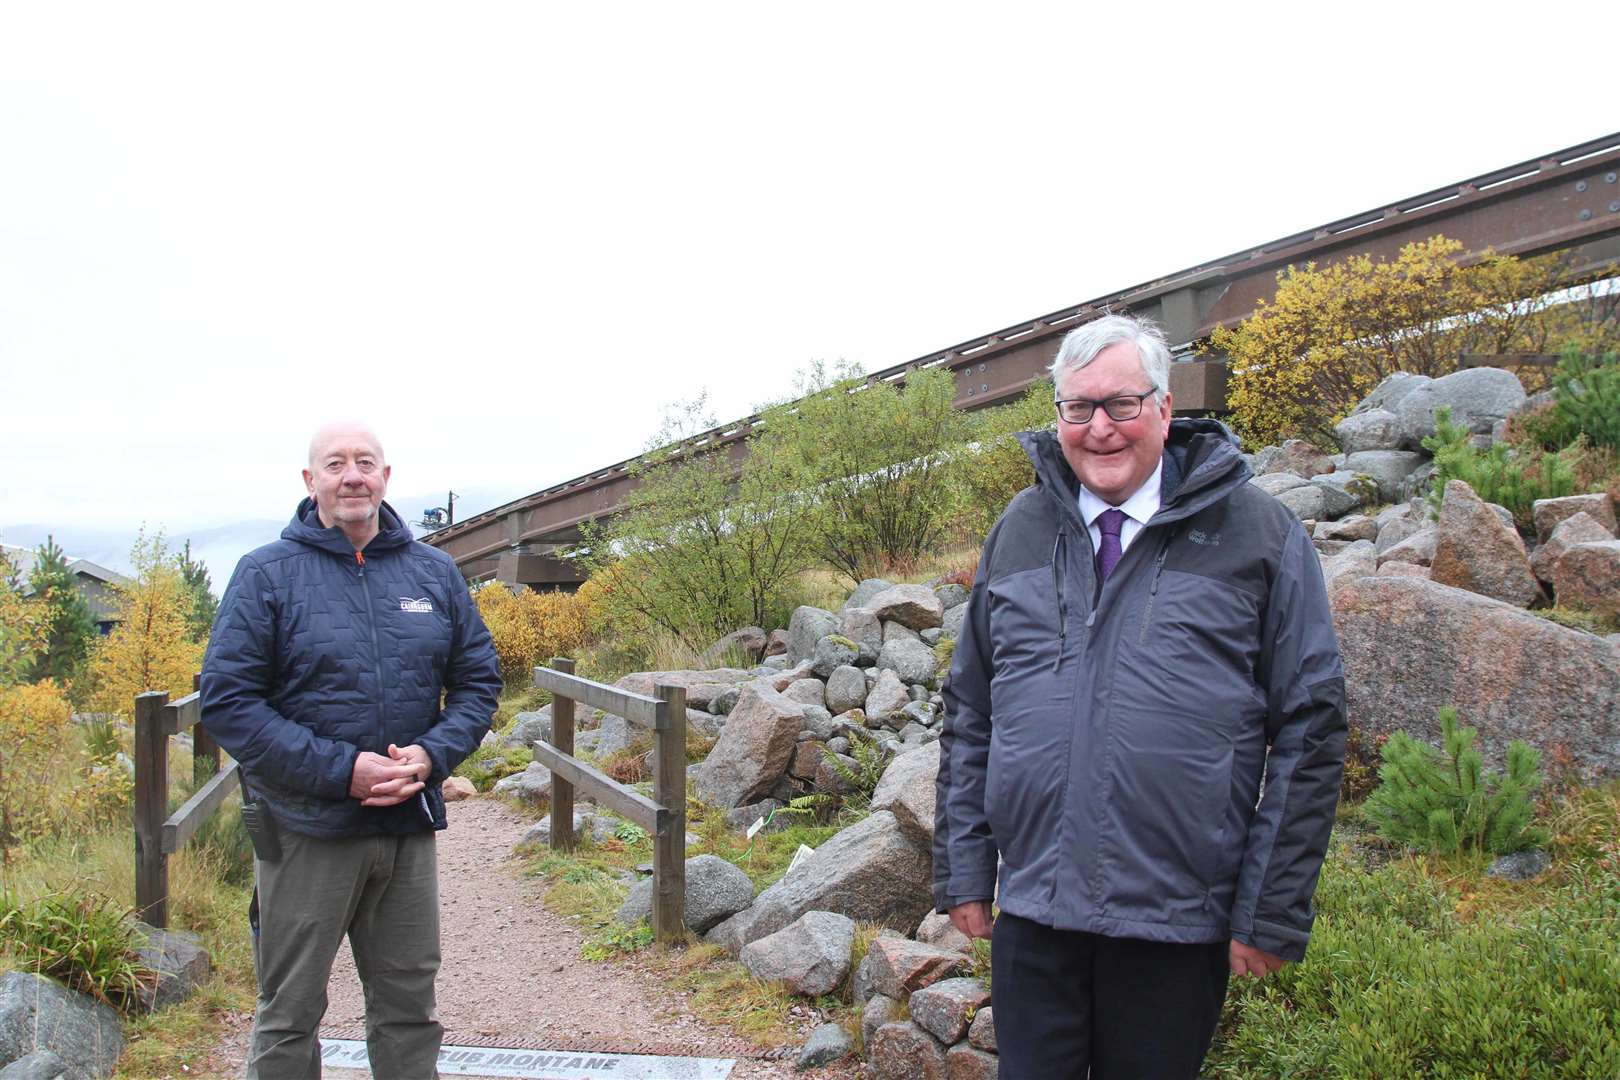 Fergus Ewing on a visit to Cairngorm Mountain last year, with Colin Matthew, the resort's operations manager.